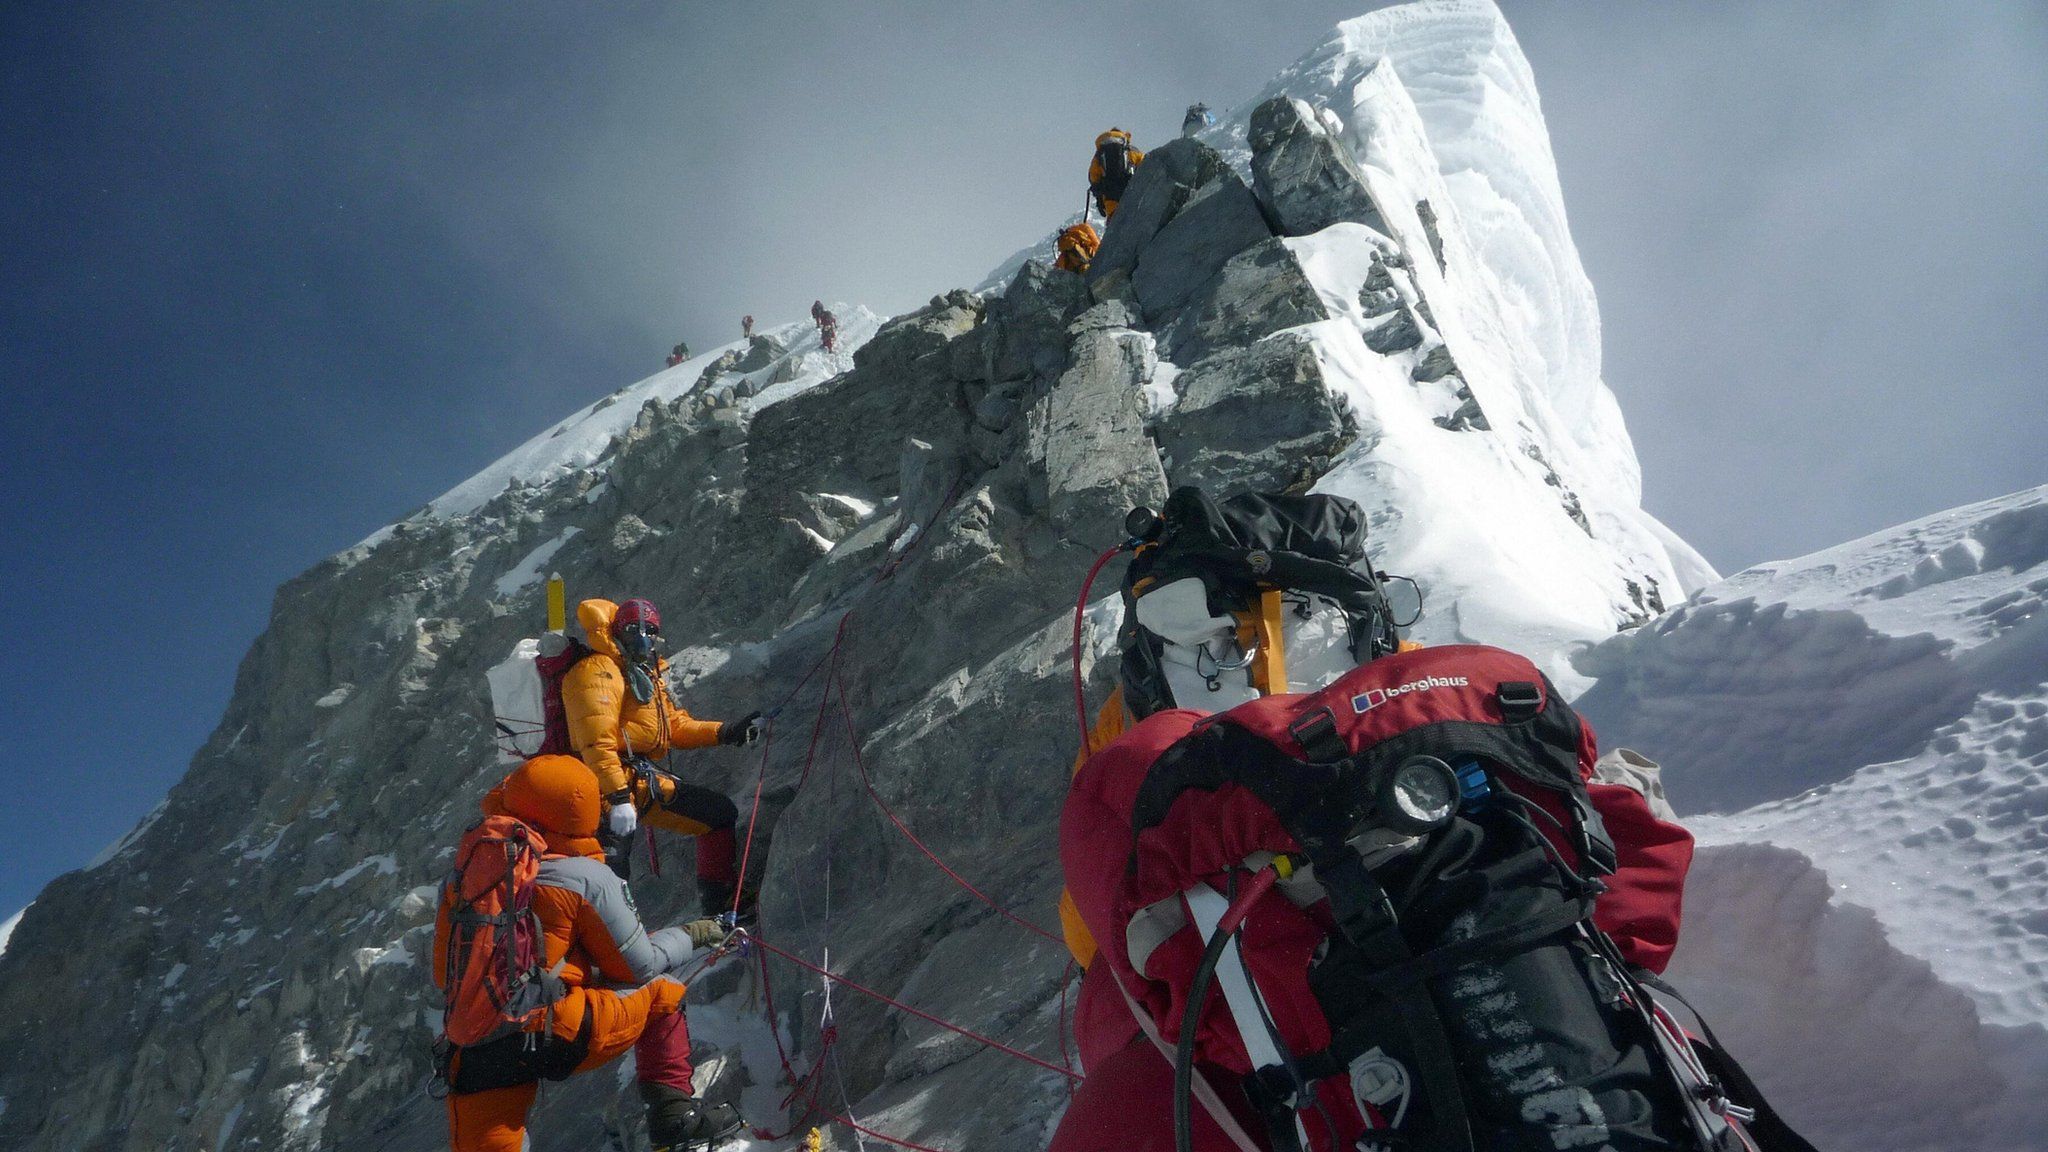 Unidentified mountaineers walk past the Hillary Step while pushing for the summit of Everest on May 19, 2009,